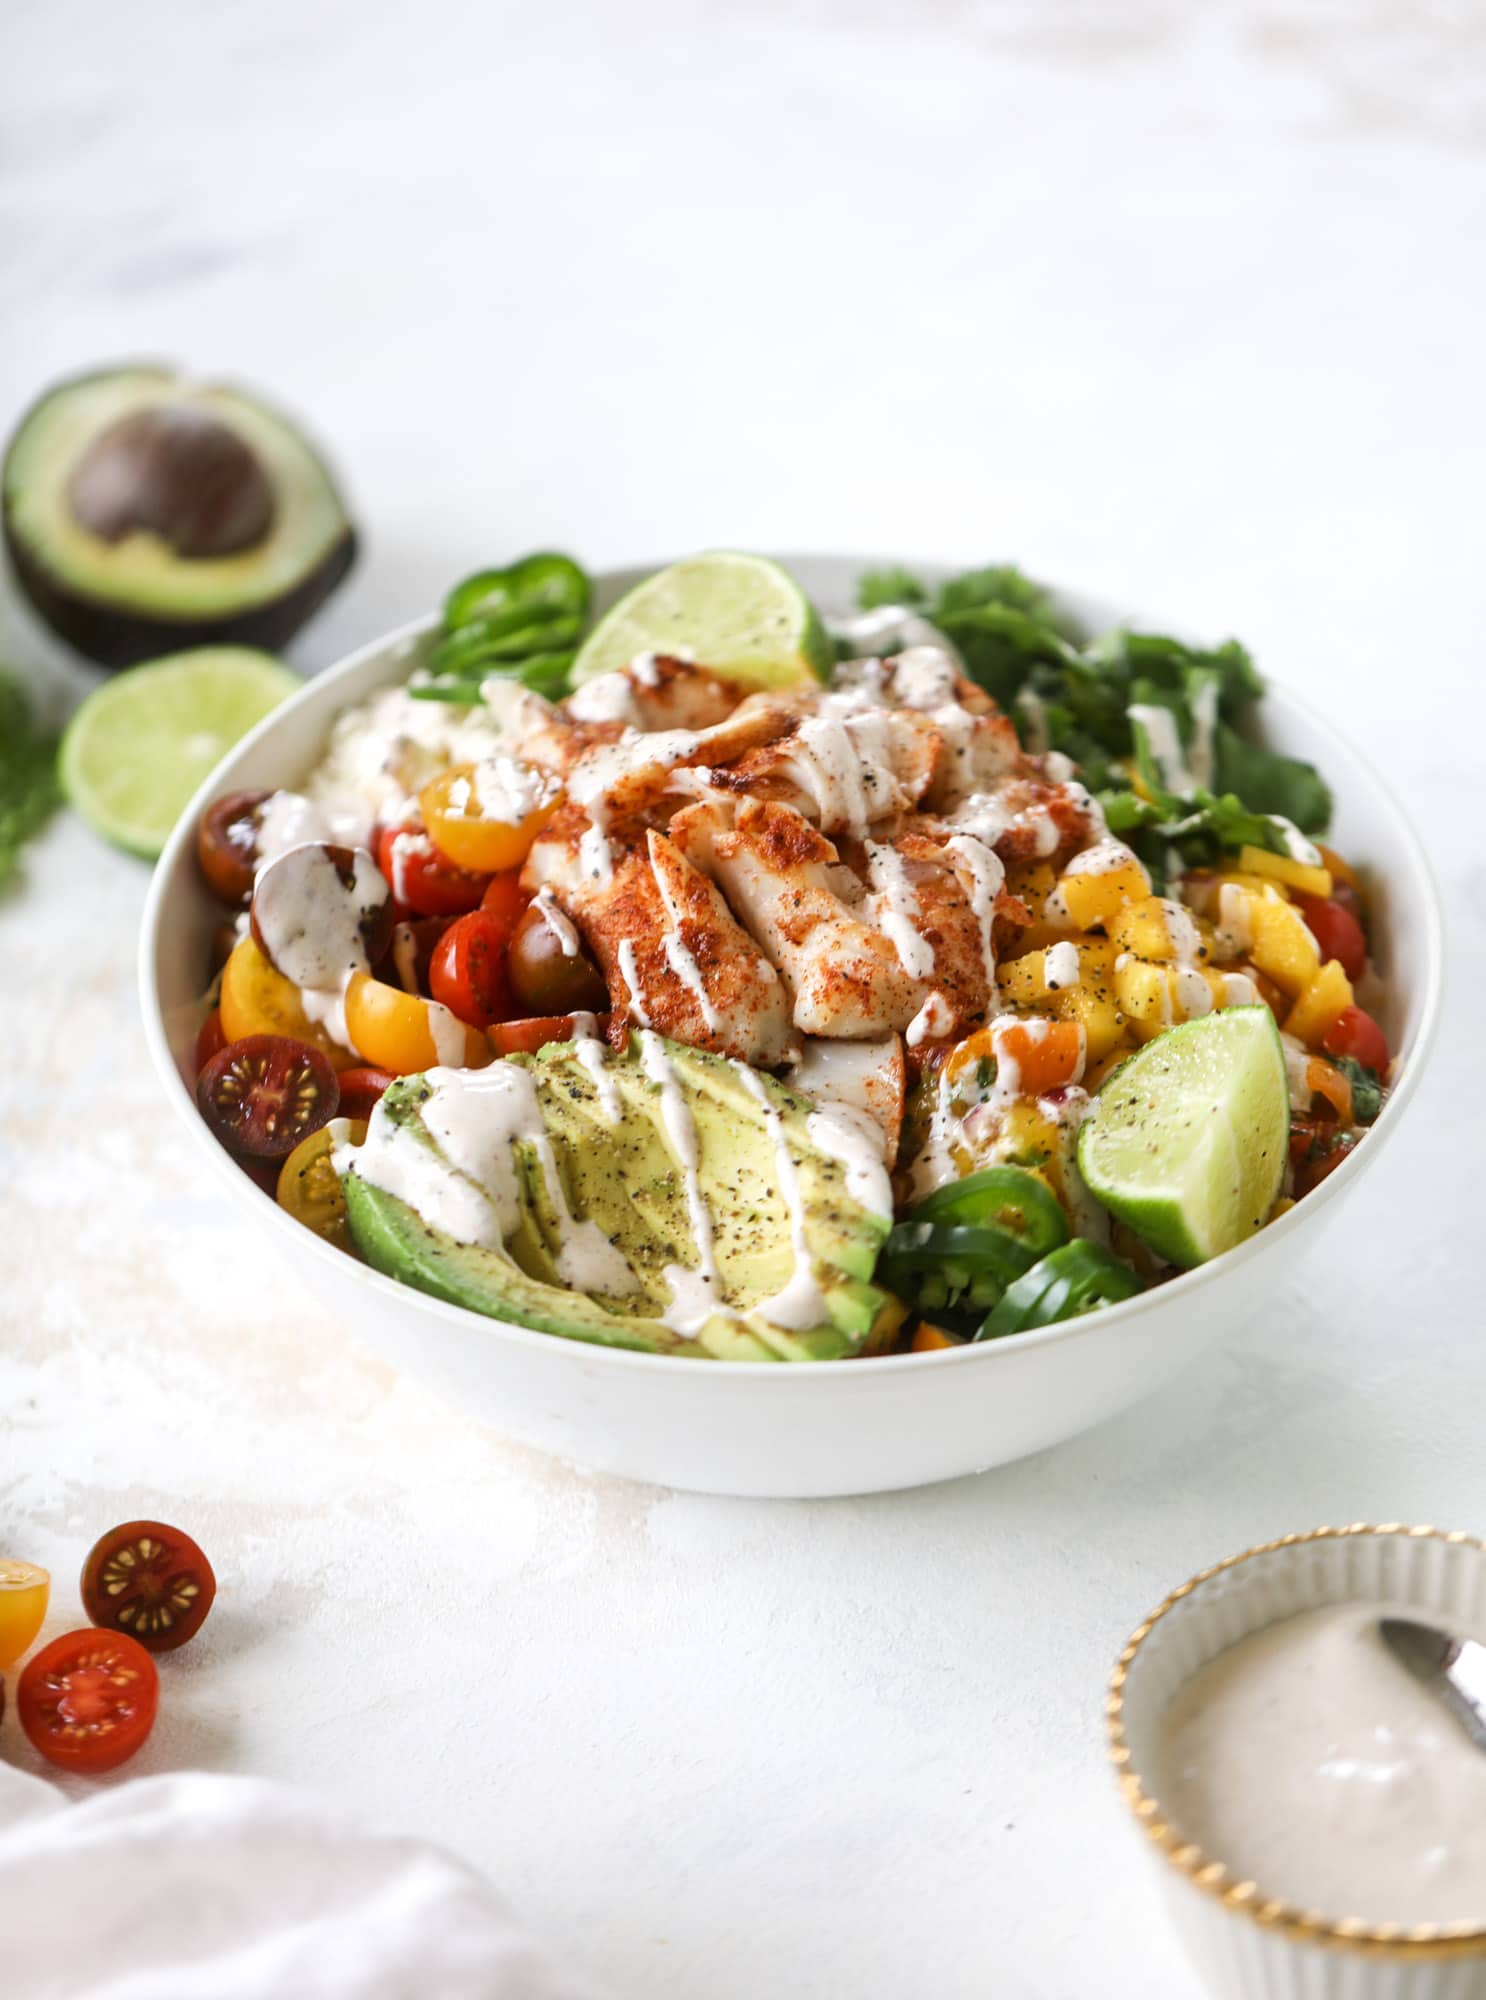 These fish taco bowls are an amazing weeknight meal idea! Napa cabbage for the base, a homemade chipotle crema, avocado, mango pico de gallo, spicy broiled white fish and lots of lime. Major flavor explosion and so easy too! I howsweeteats.com #fish #taco #bowls #spicy #healthy #dinner